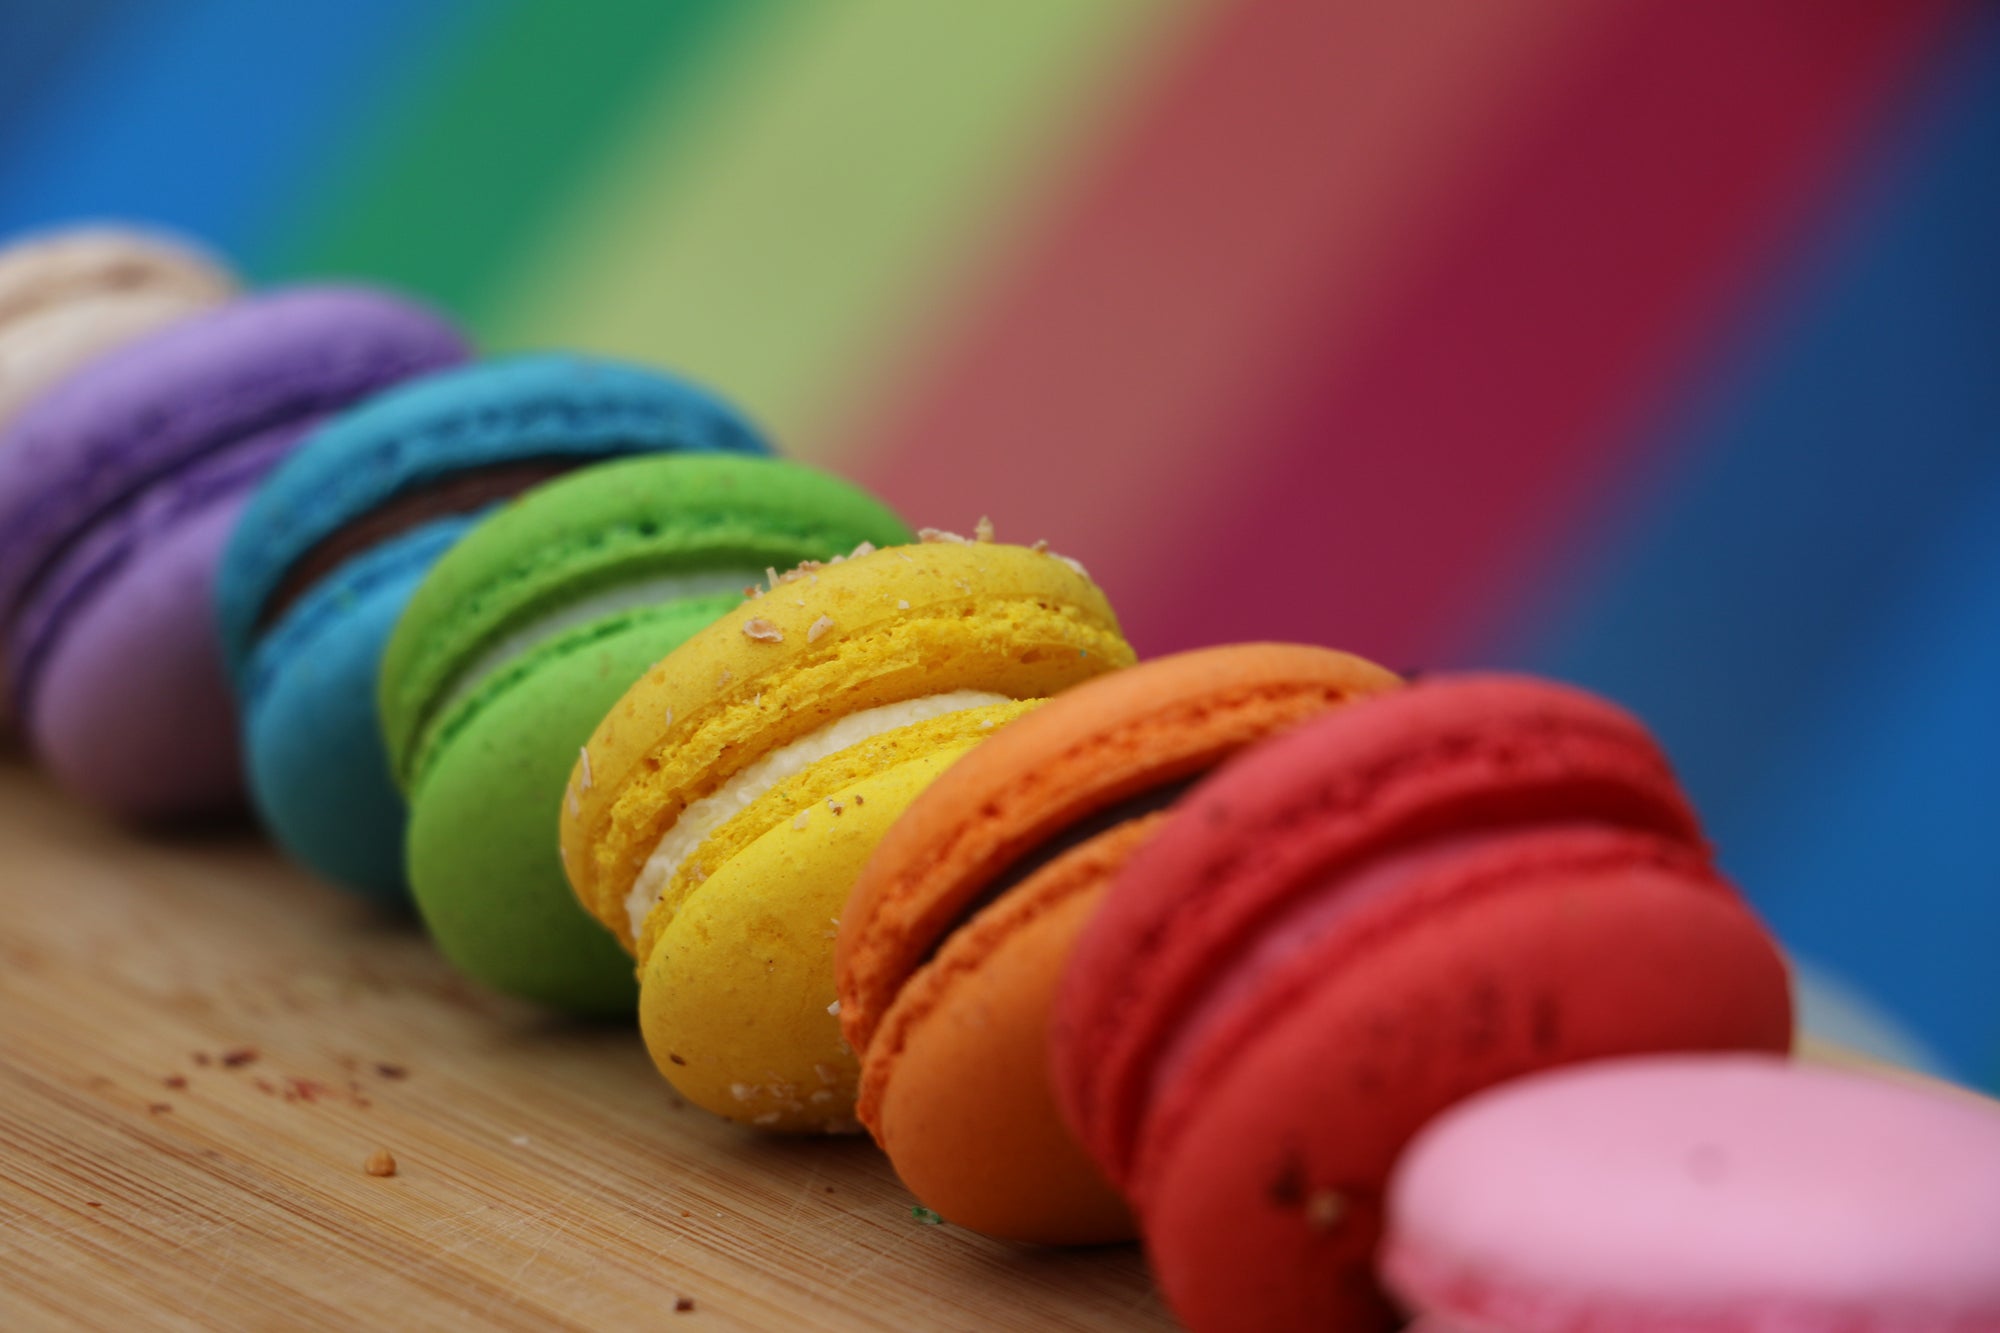 Macarons are a popular choice when it comes to catering a party